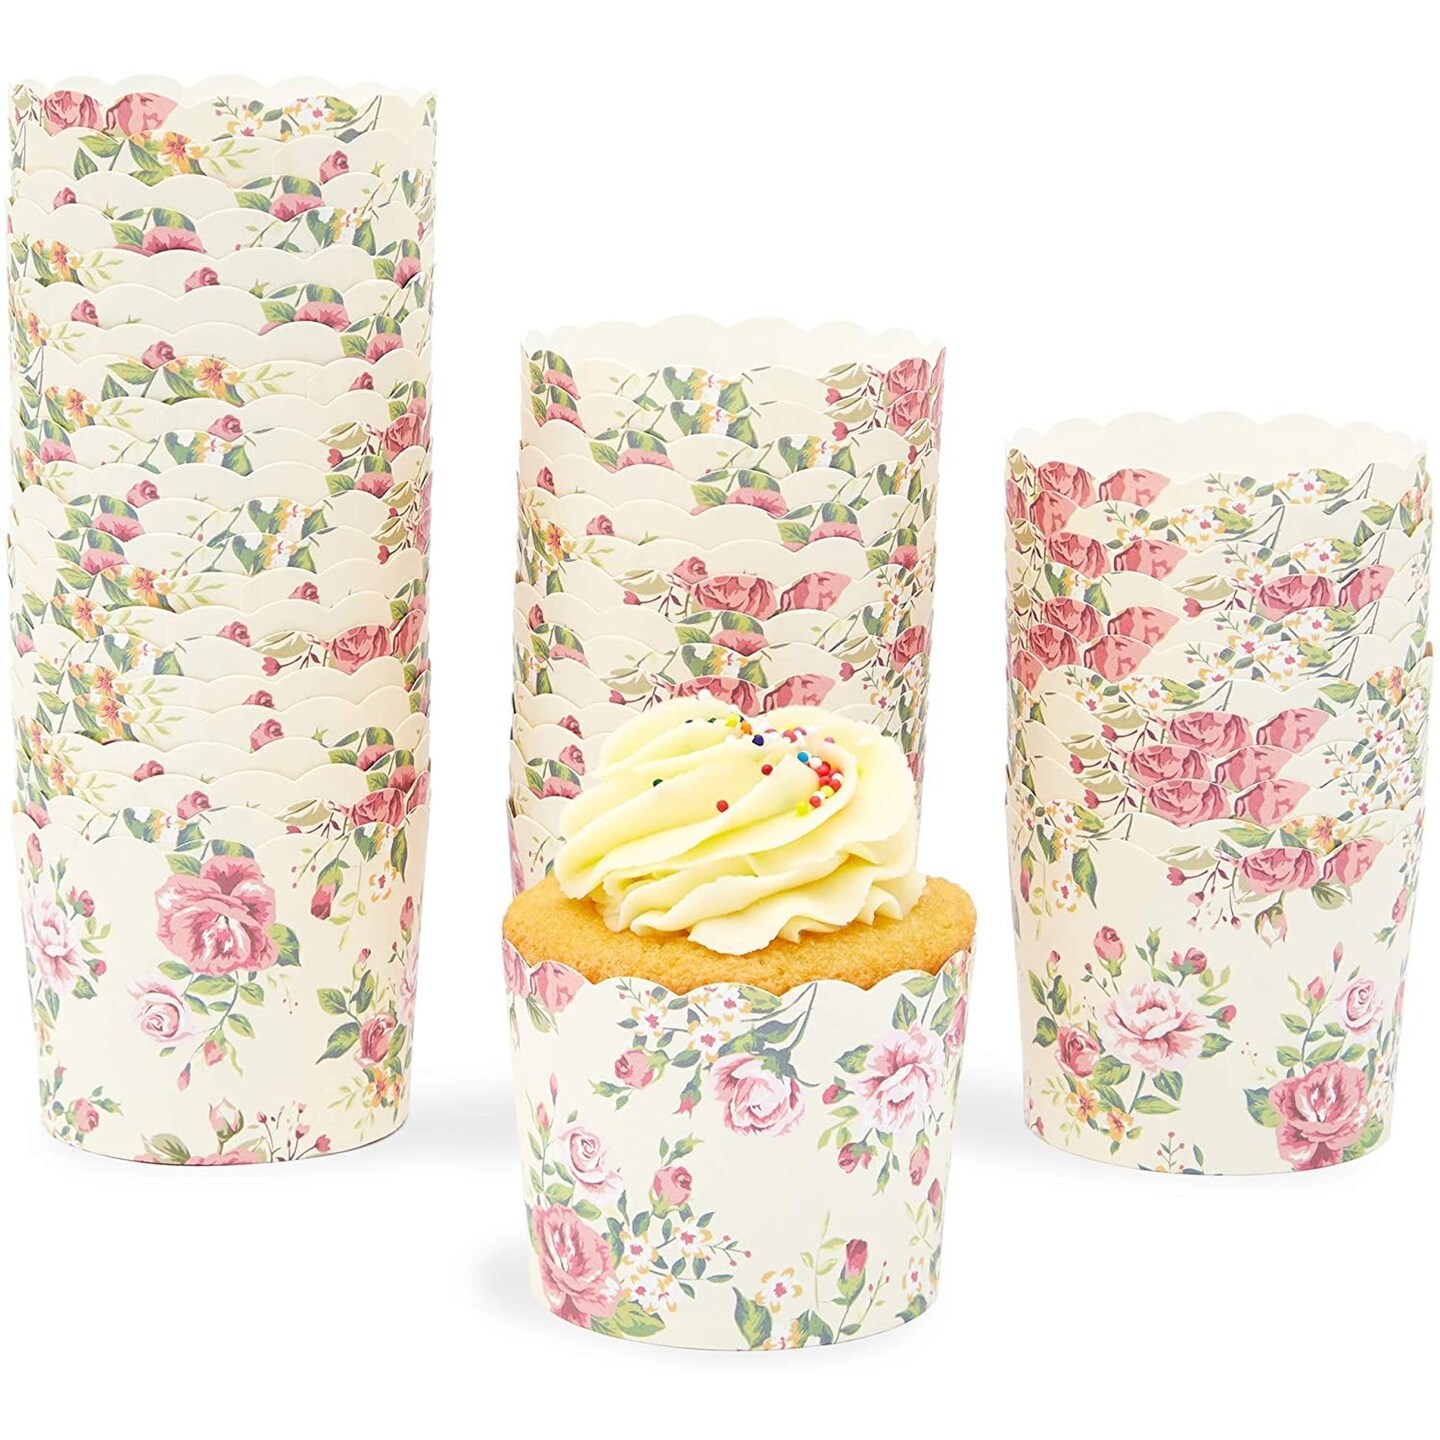 50-Pack Vintage Style Floral Cupcake Wrappers for Wedding, Flower Paper Baking Cups and Muffin Liners for Tea Parties, Bridal Showers, Baby Showers &#x26; Garden Parties- 2.25 x 2.75 In